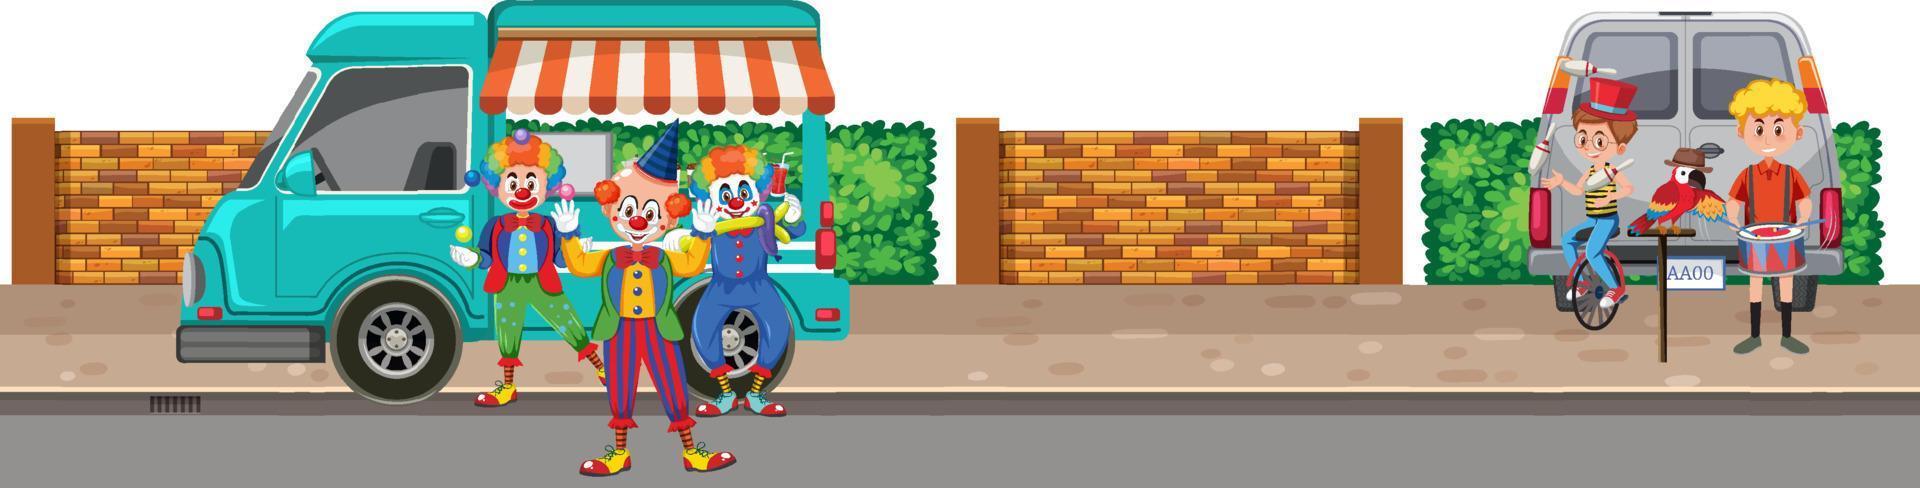 Clowns and musicians performing on the street vector